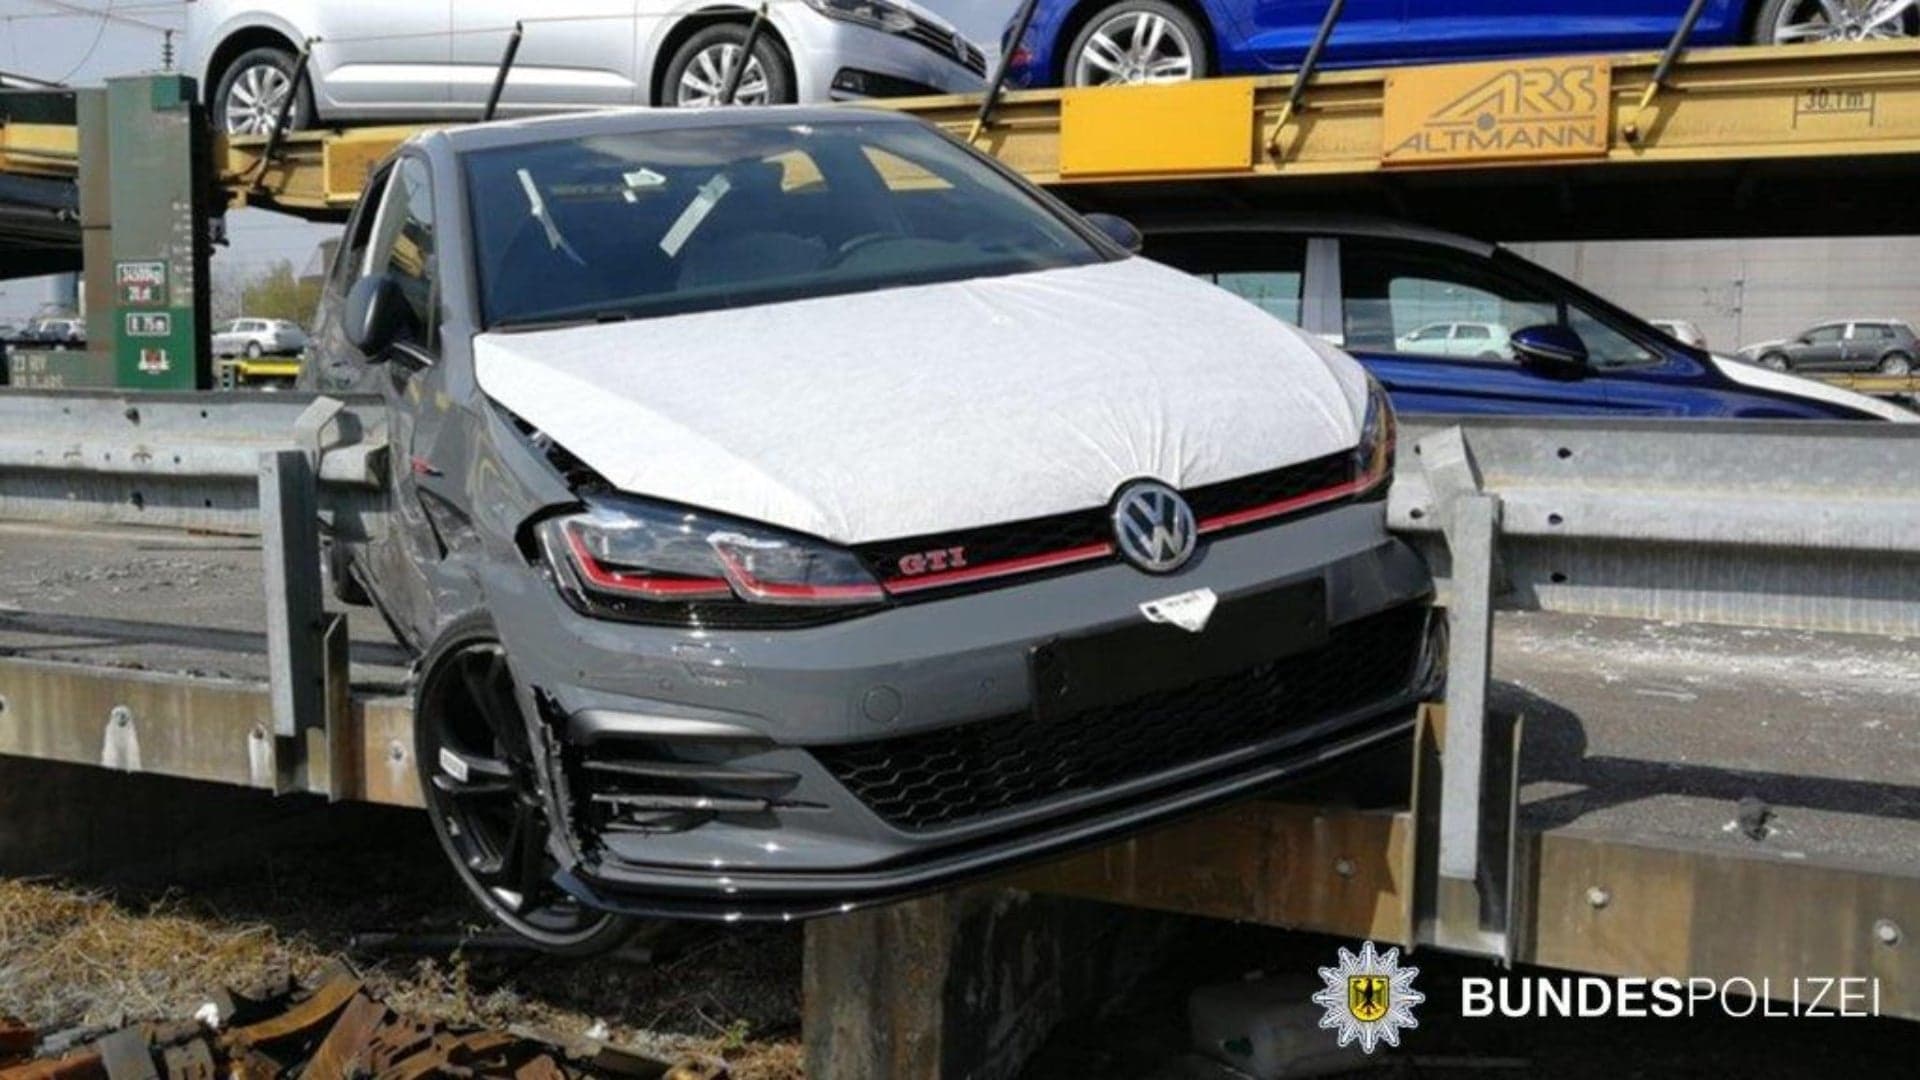 Dumb Thieves Crash VW Golf GTI Trying to Steal it Off a Moving Freight Train